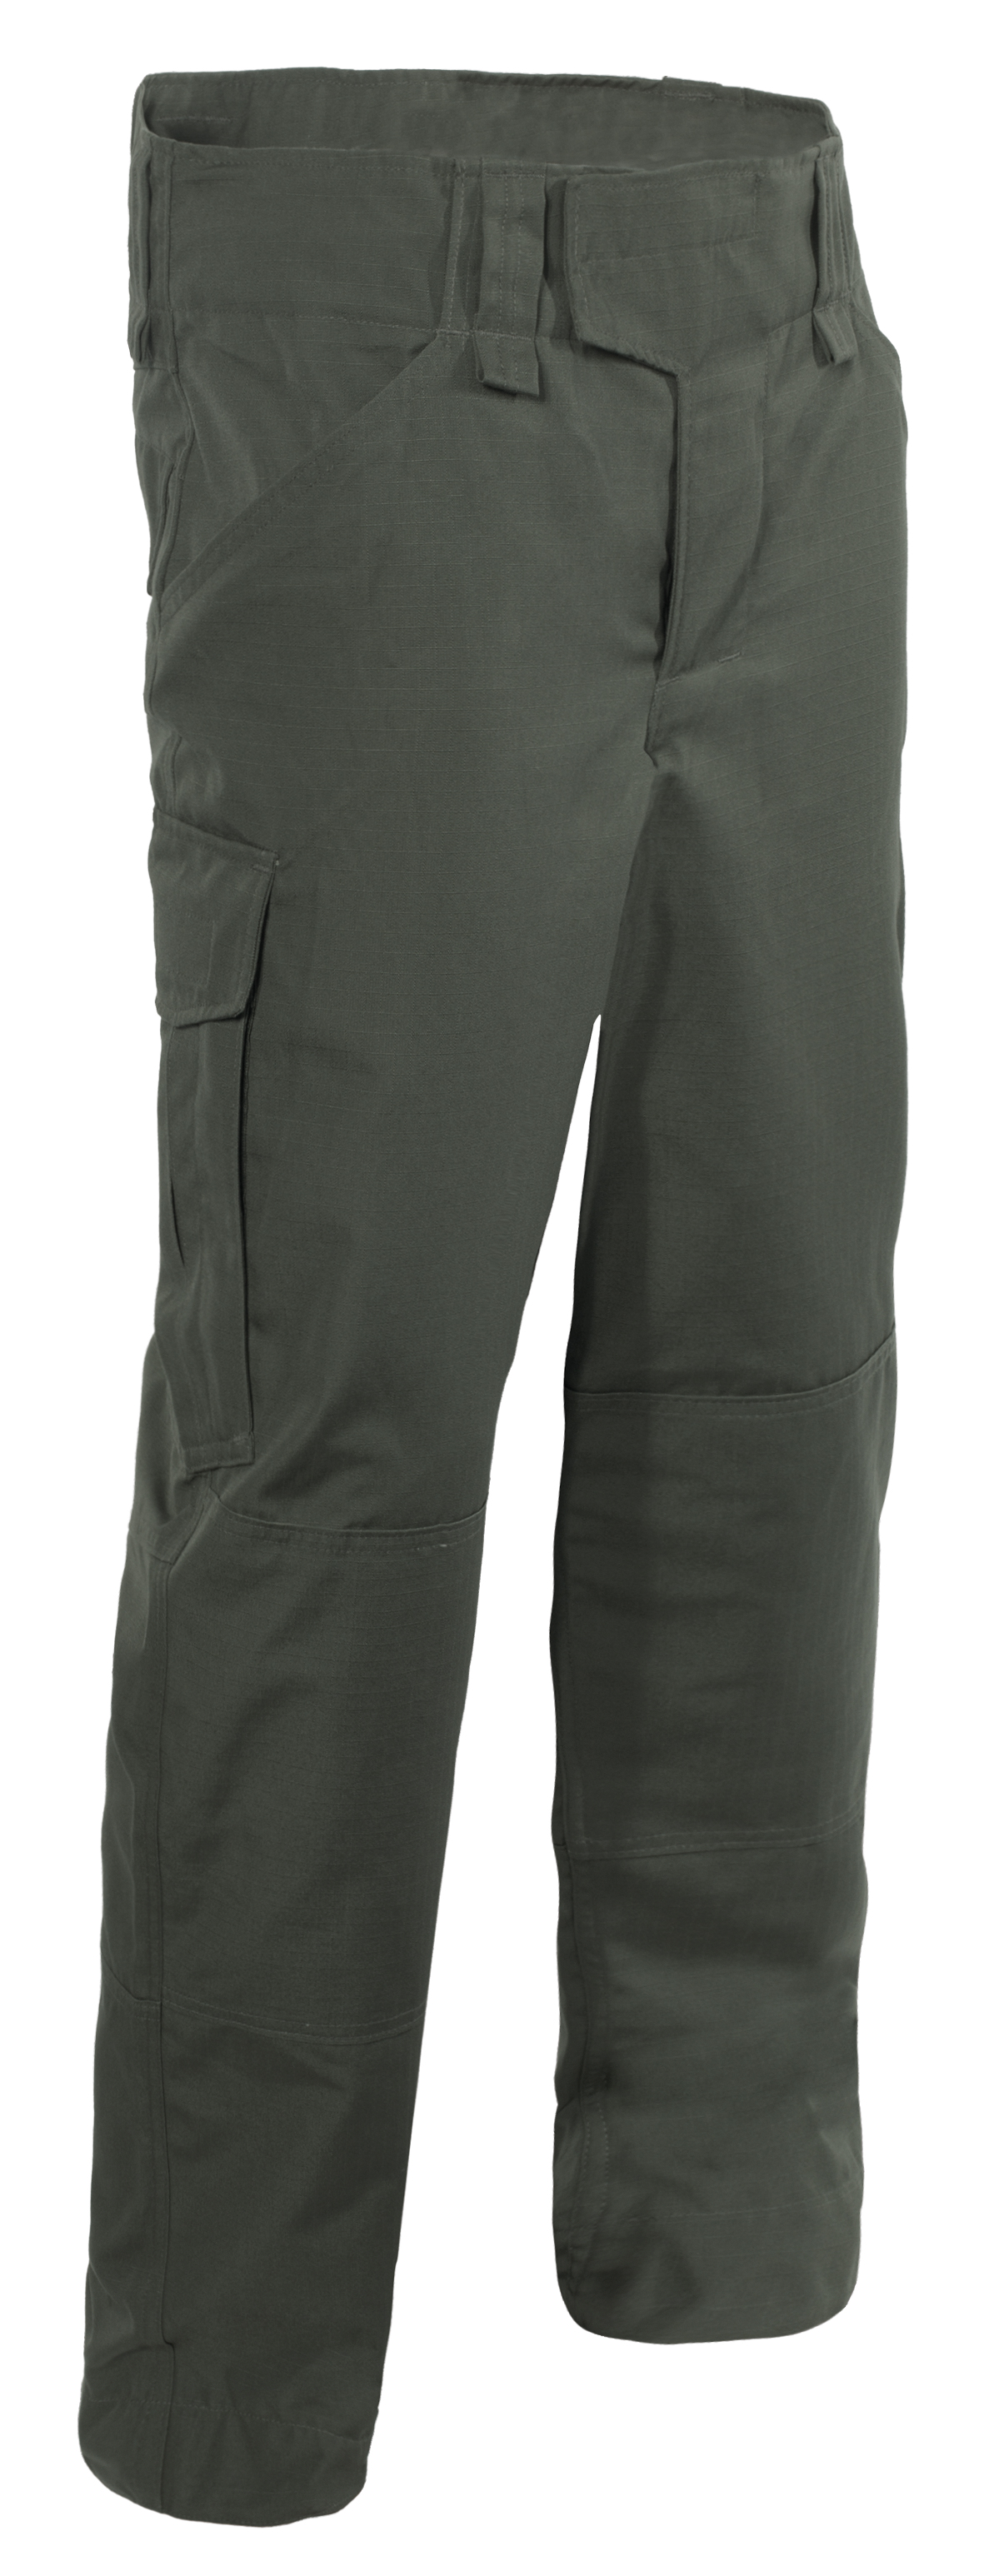 Buy Grey Trousers & Pants for Men by THE NOMHERD Online | Ajio.com